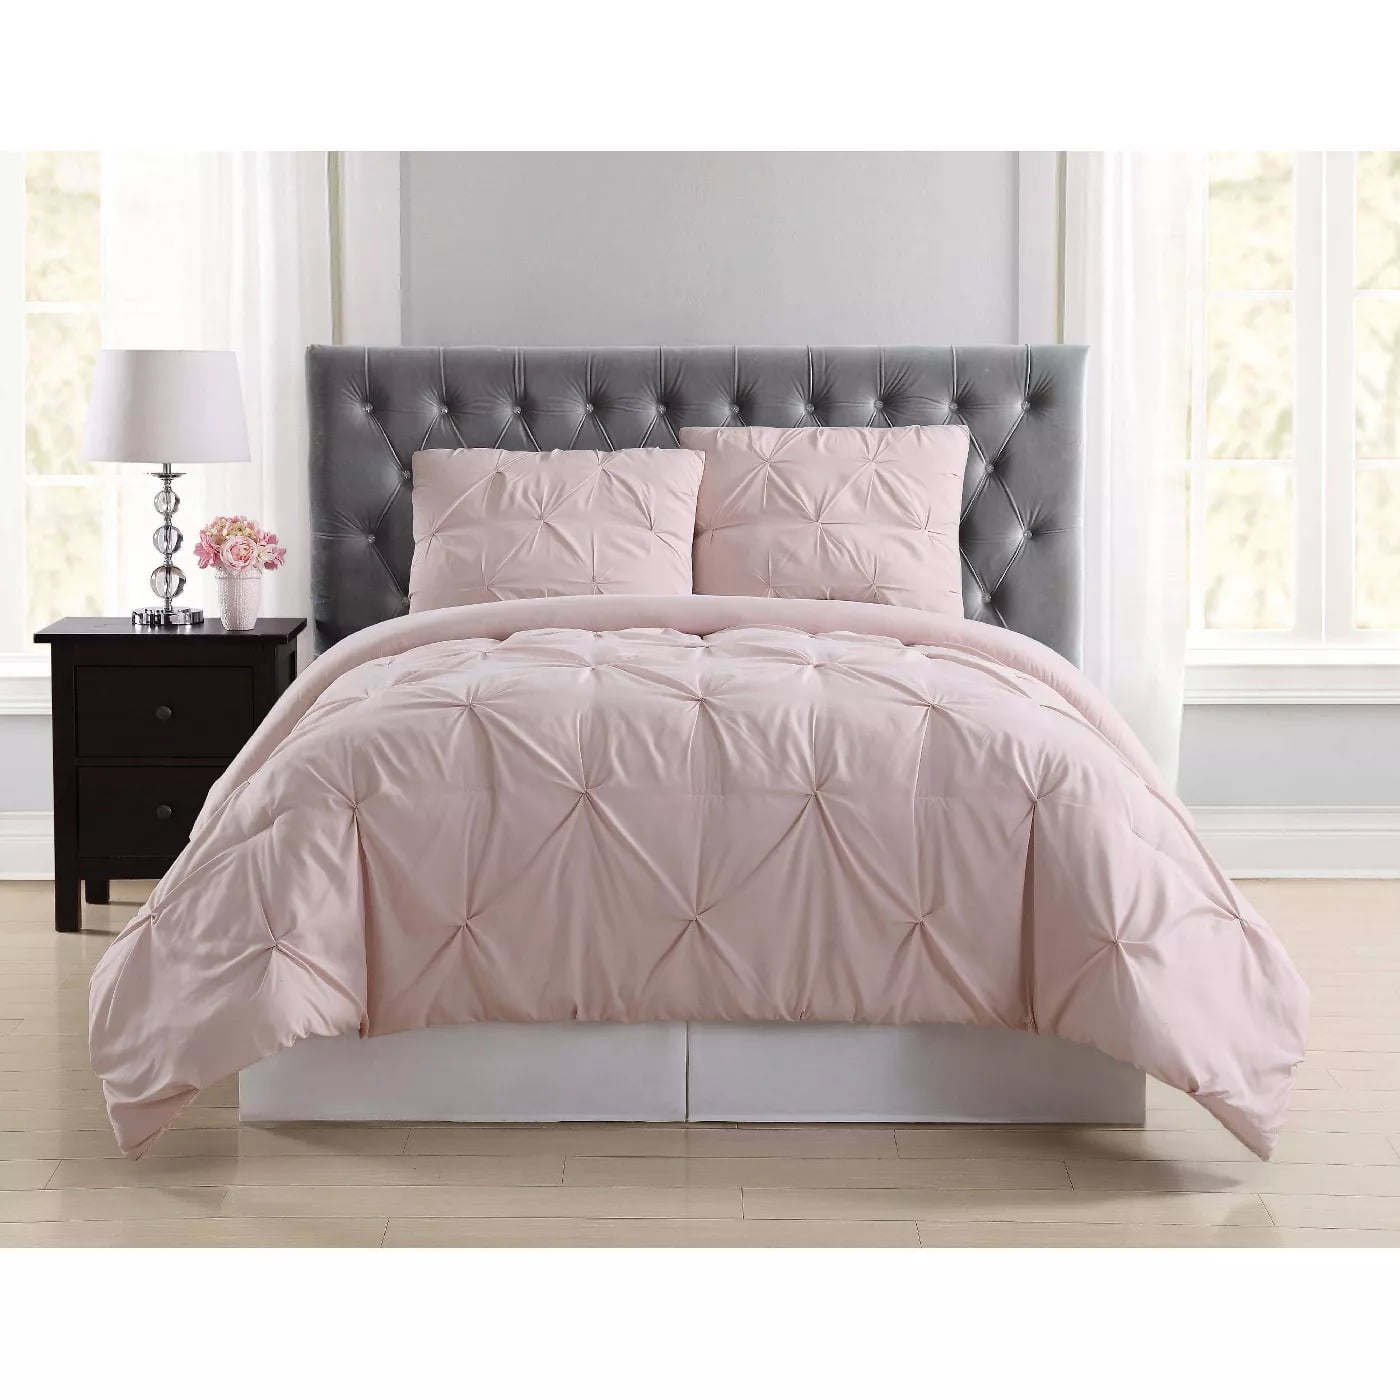 Truly Soft Everyday Pleated Duvet Cover Set, Full/Queen [90 inches (W) x 96 inches (L)], Blush